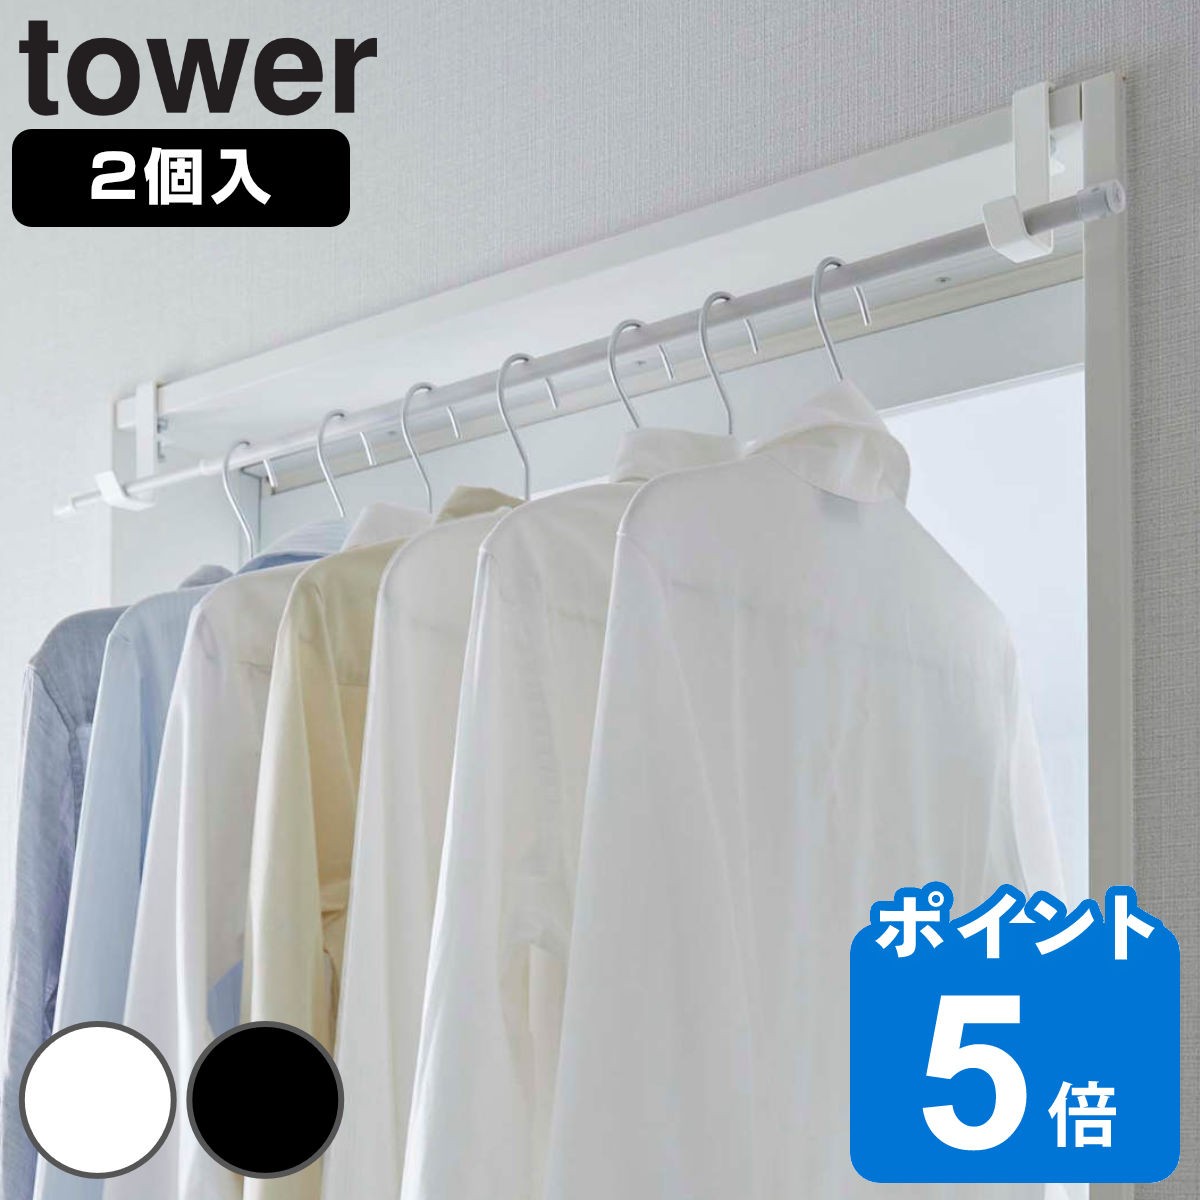 tower  |[z_[ 2g